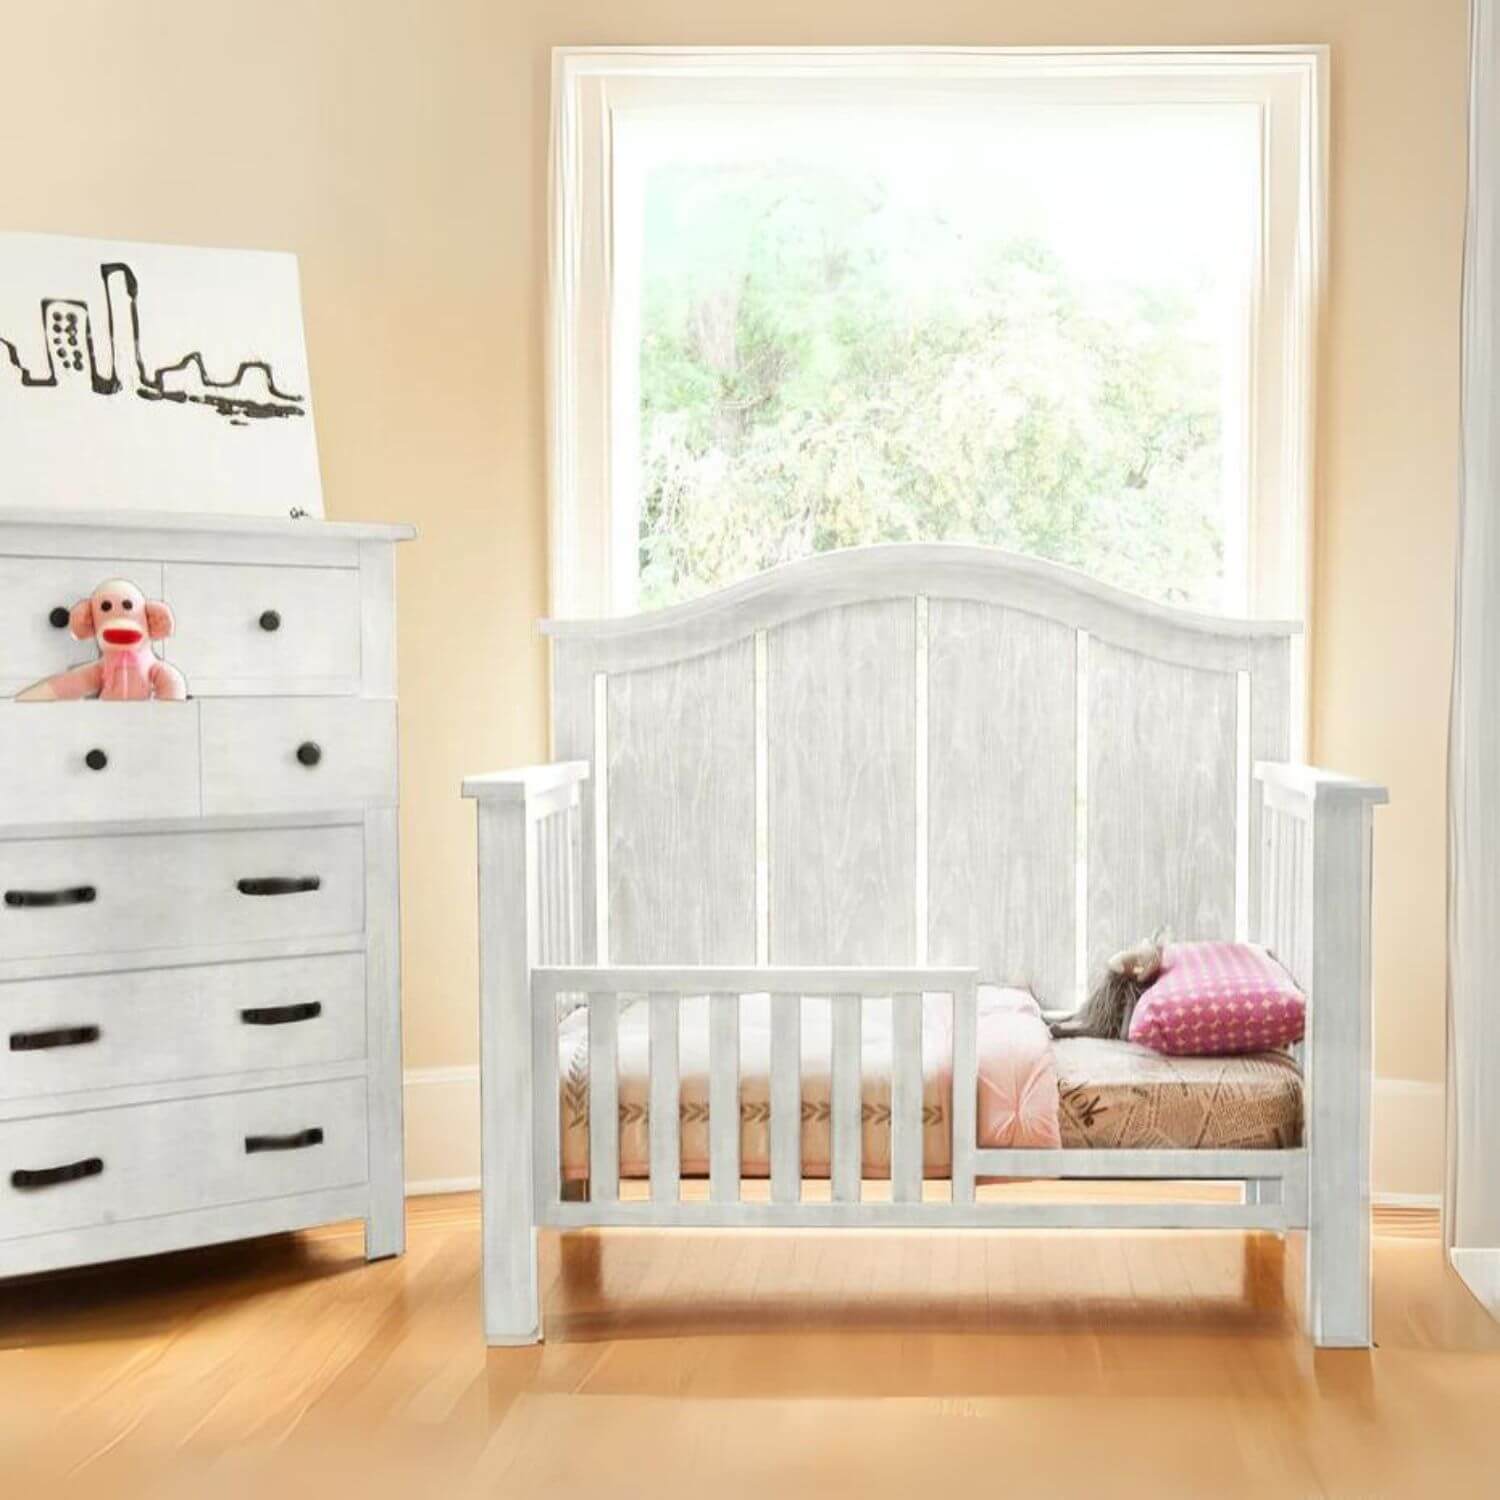 Milk Street Baby Relic Toddler Bed Conversion Kit Cloud - Lifestyle